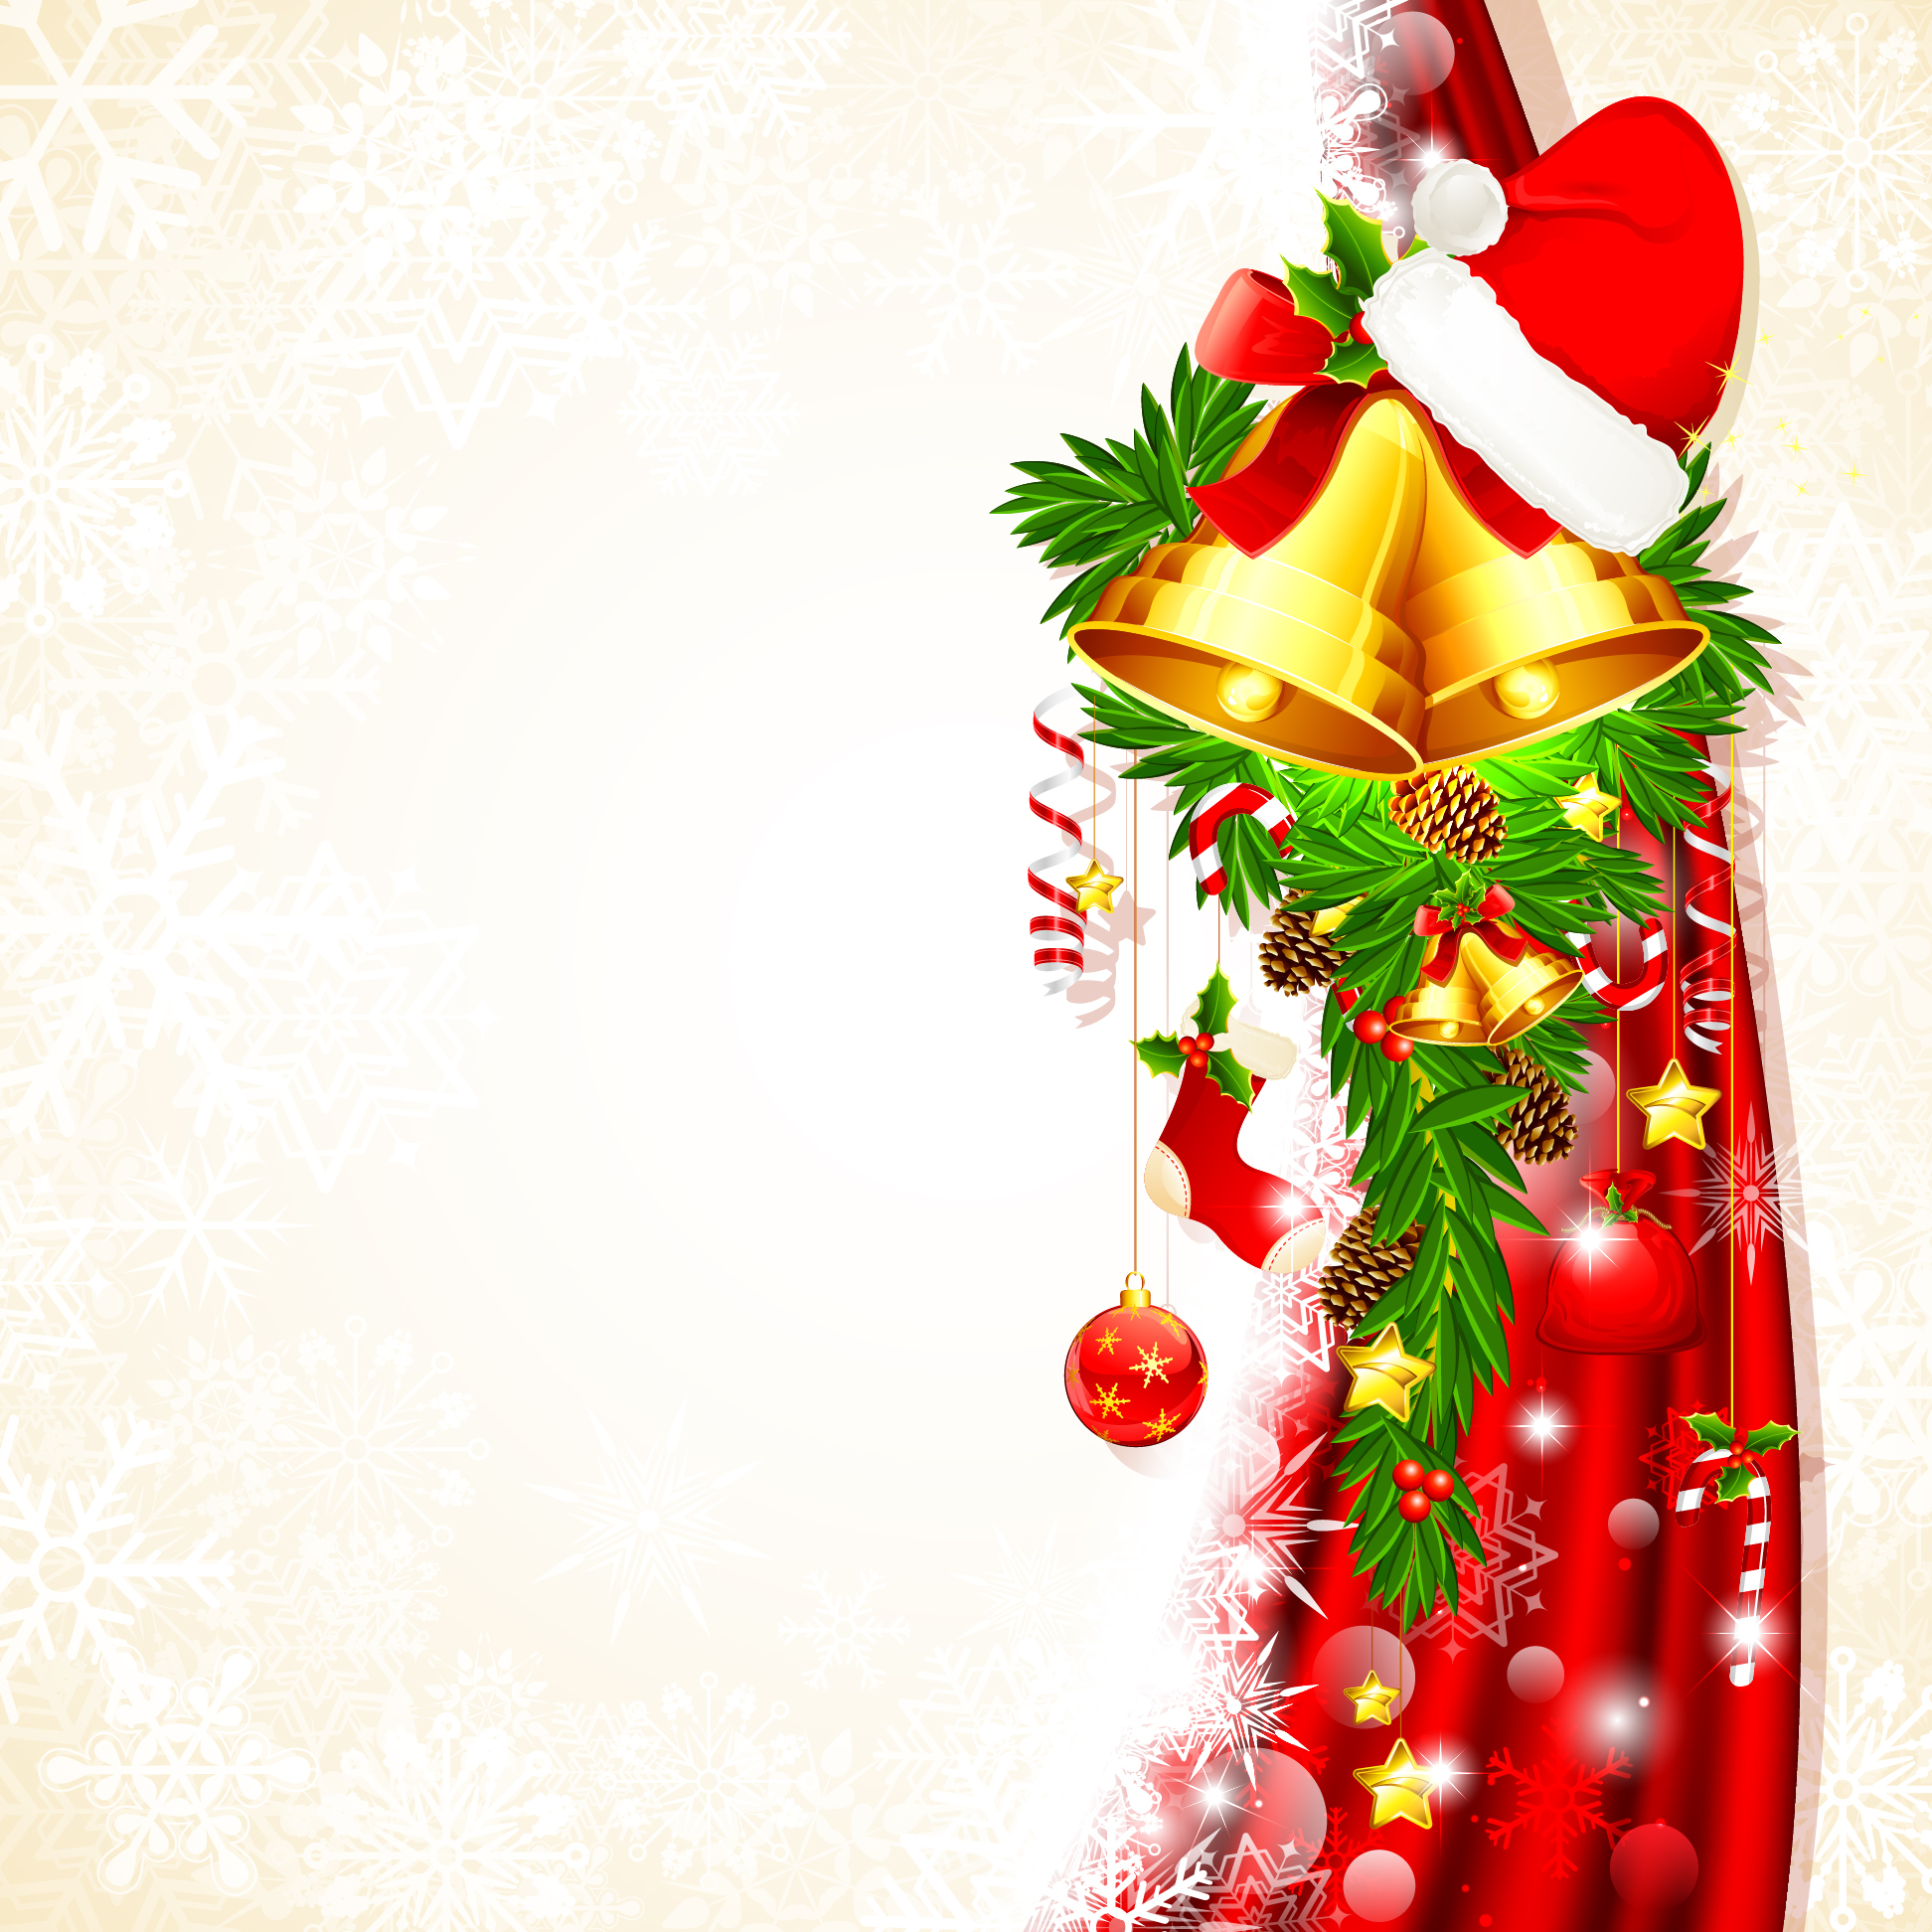 Free Christmas Background Images Download Free Clip Art Free Clip Art On Clipart Library